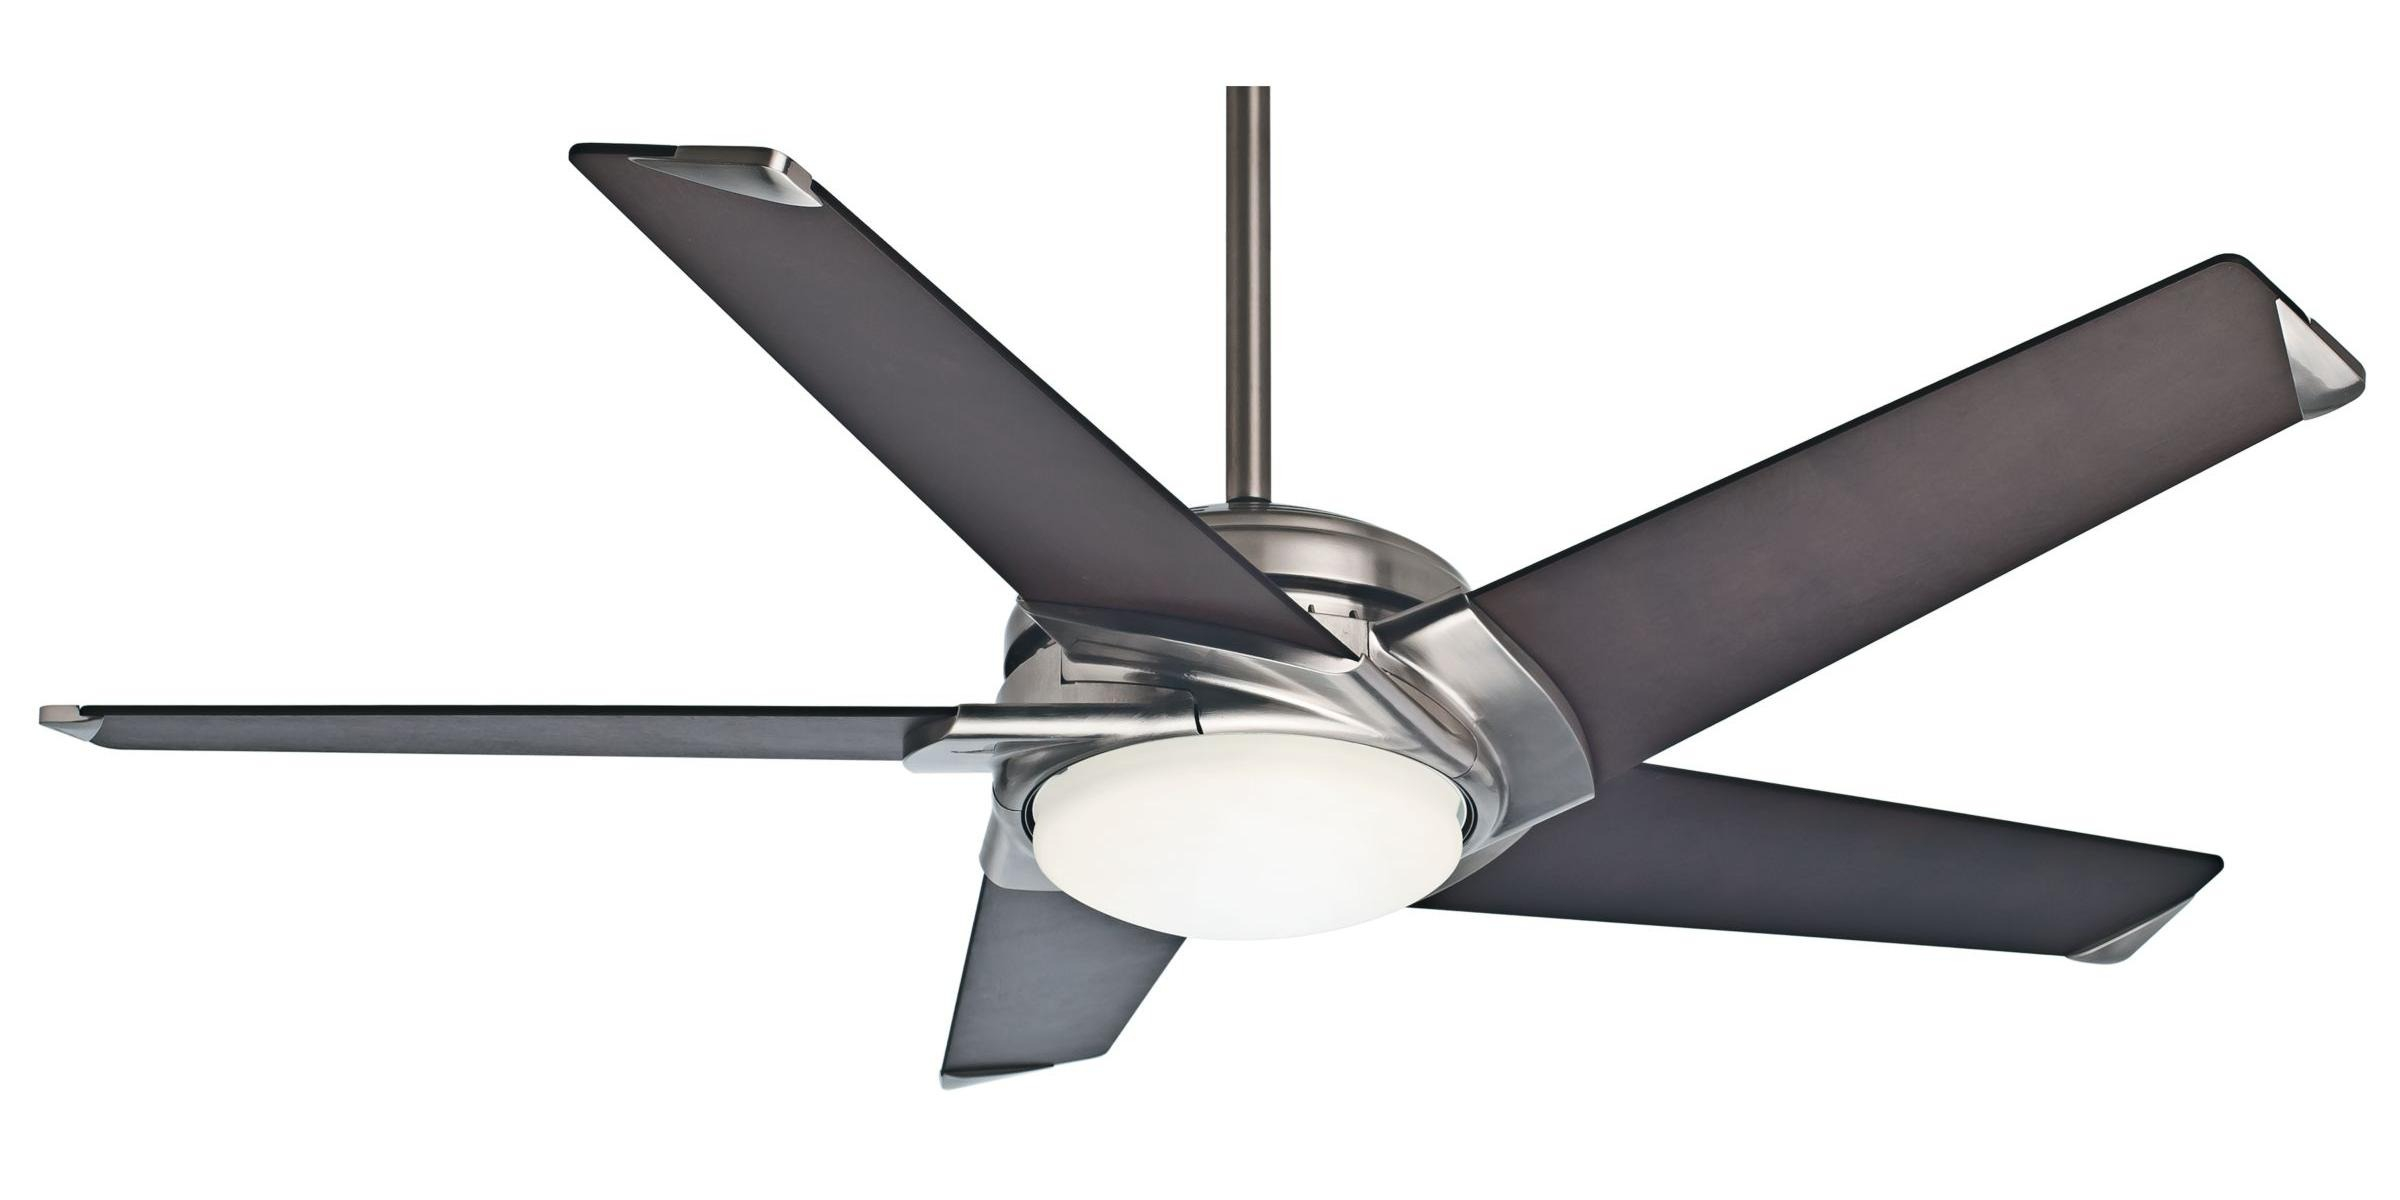 High Powered Ceiling Fans Ceiling Fans Ideas in dimensions 2400 X 1200